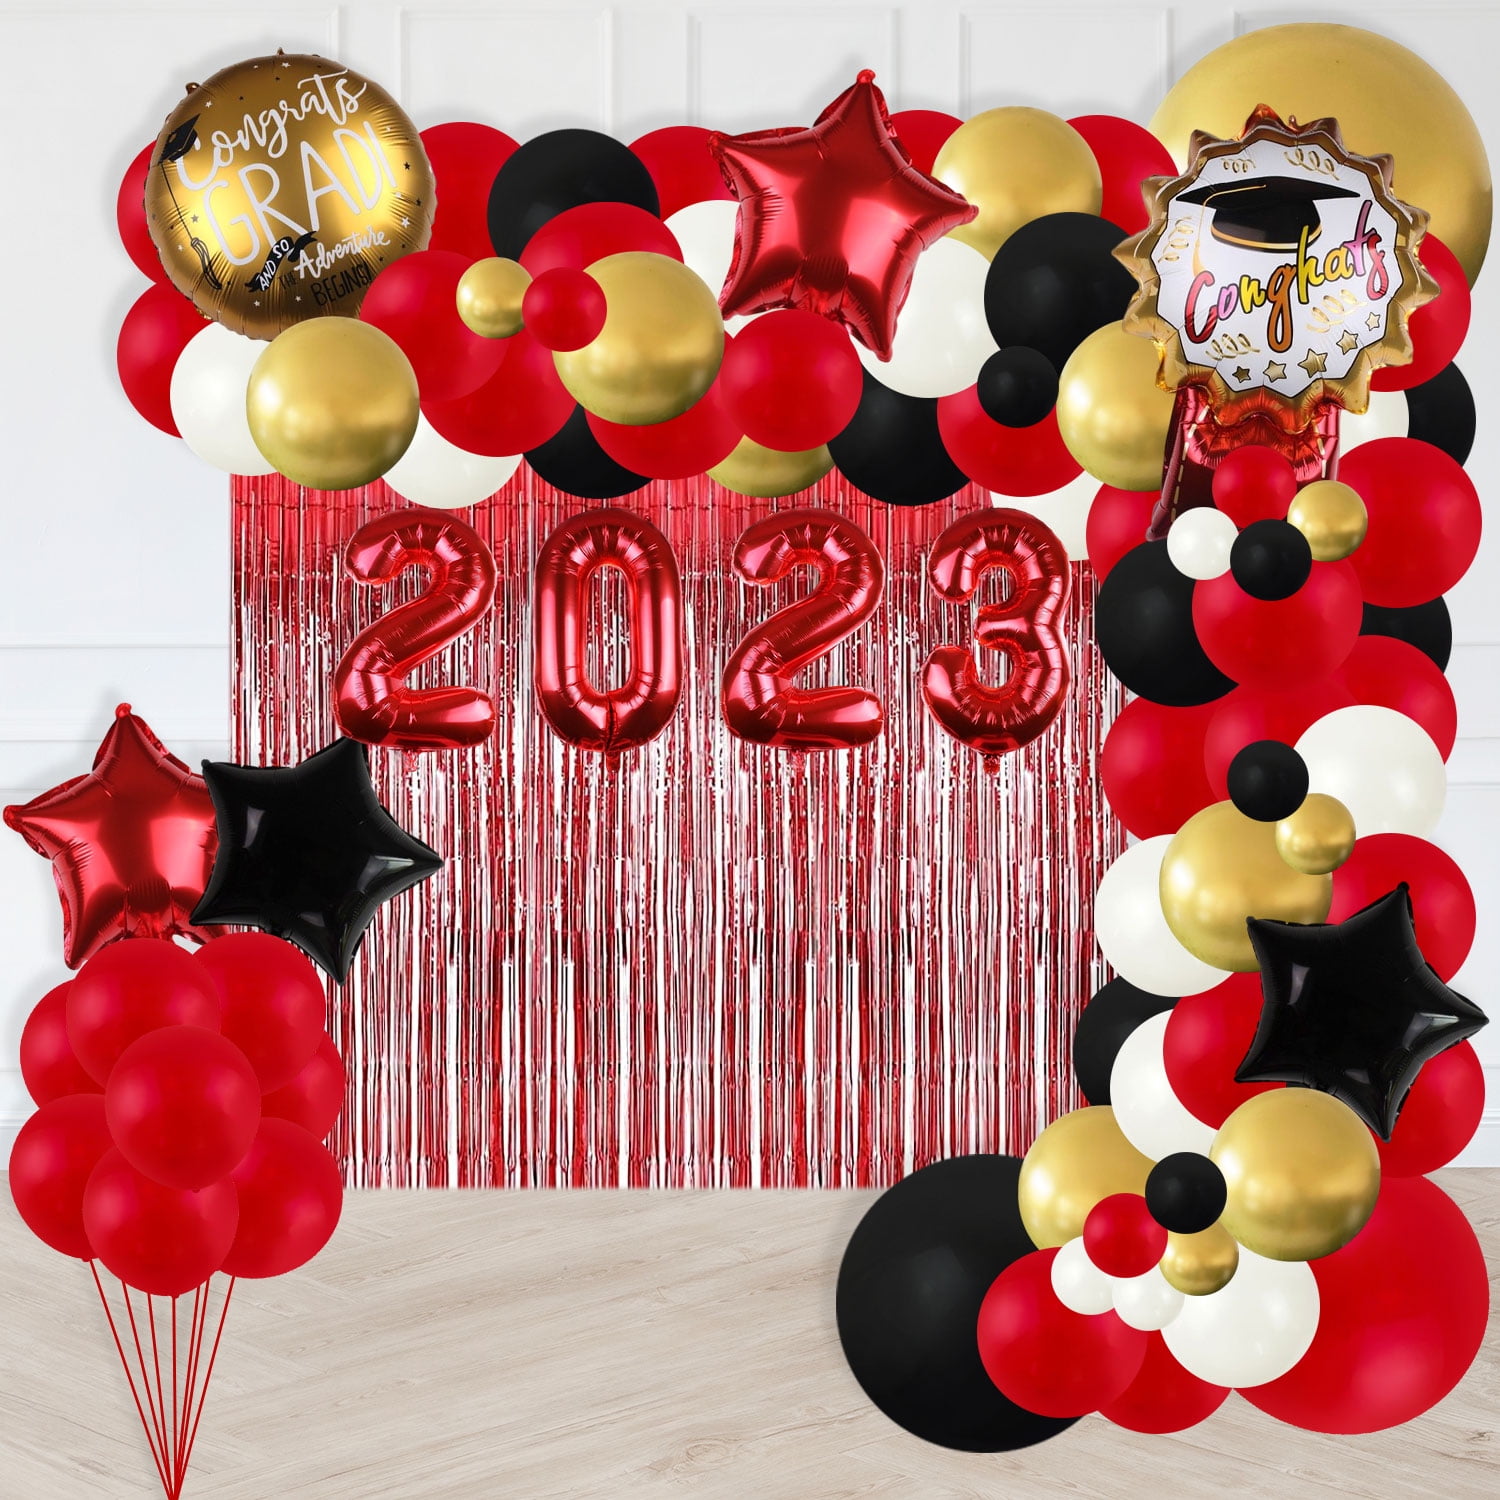 Graduation Party Decorations Class of 2024 Black Gold Graduation  Decorations Including Congrats Grad Banner Backdrop and 60 Pcs 12 Inches  Balloons for